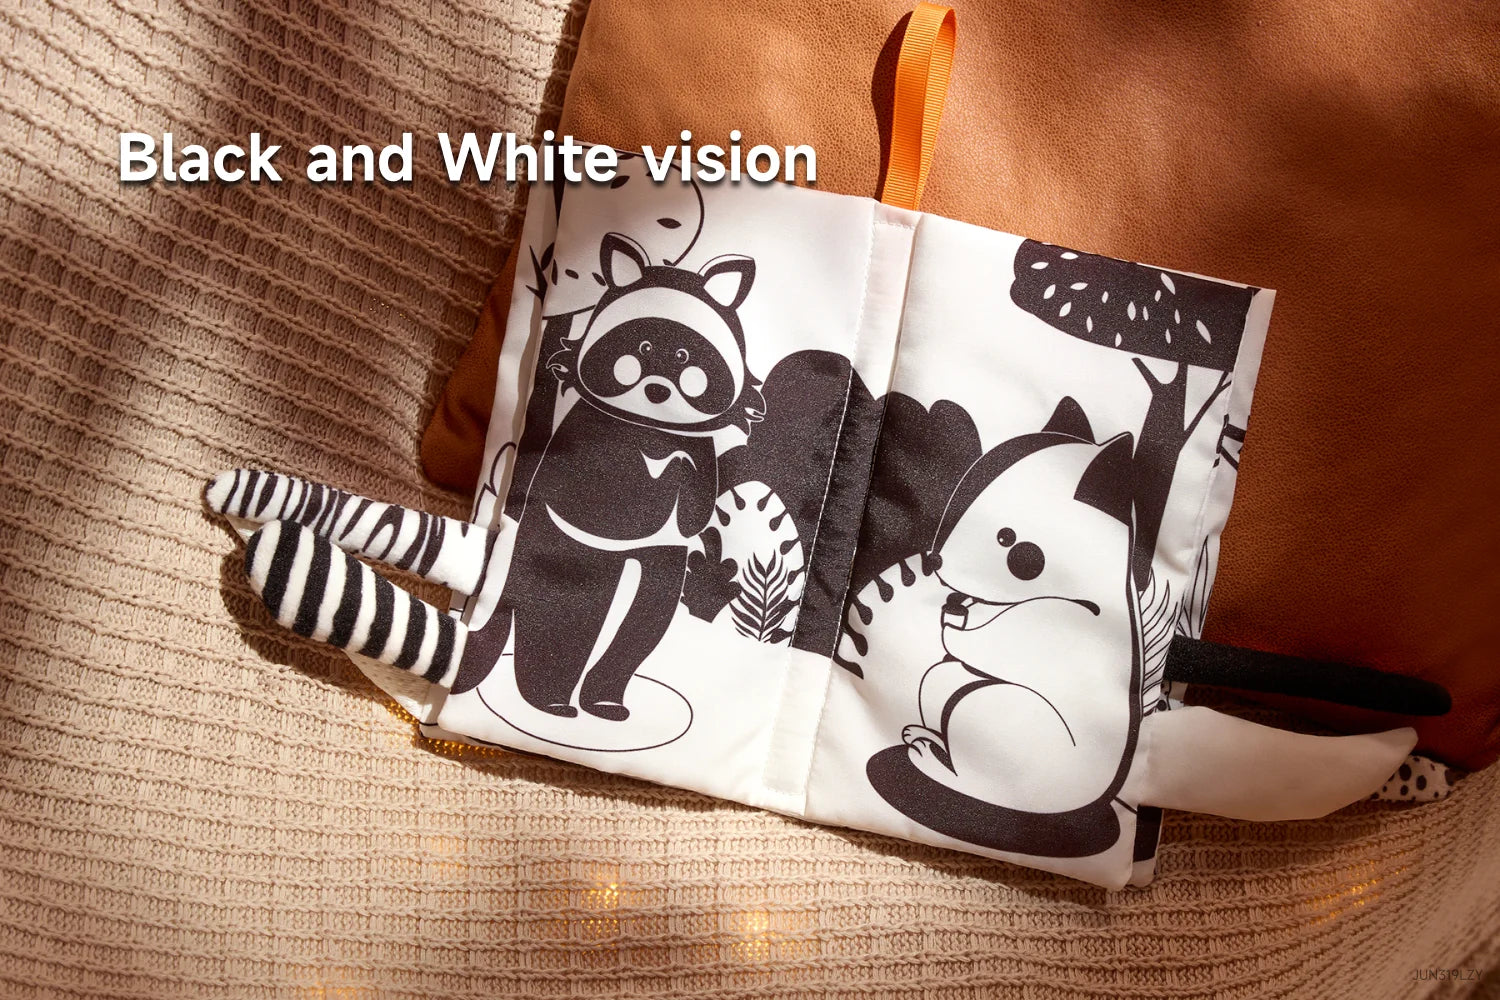 Crinkle cloth book with black and white patterns for visual stimulation